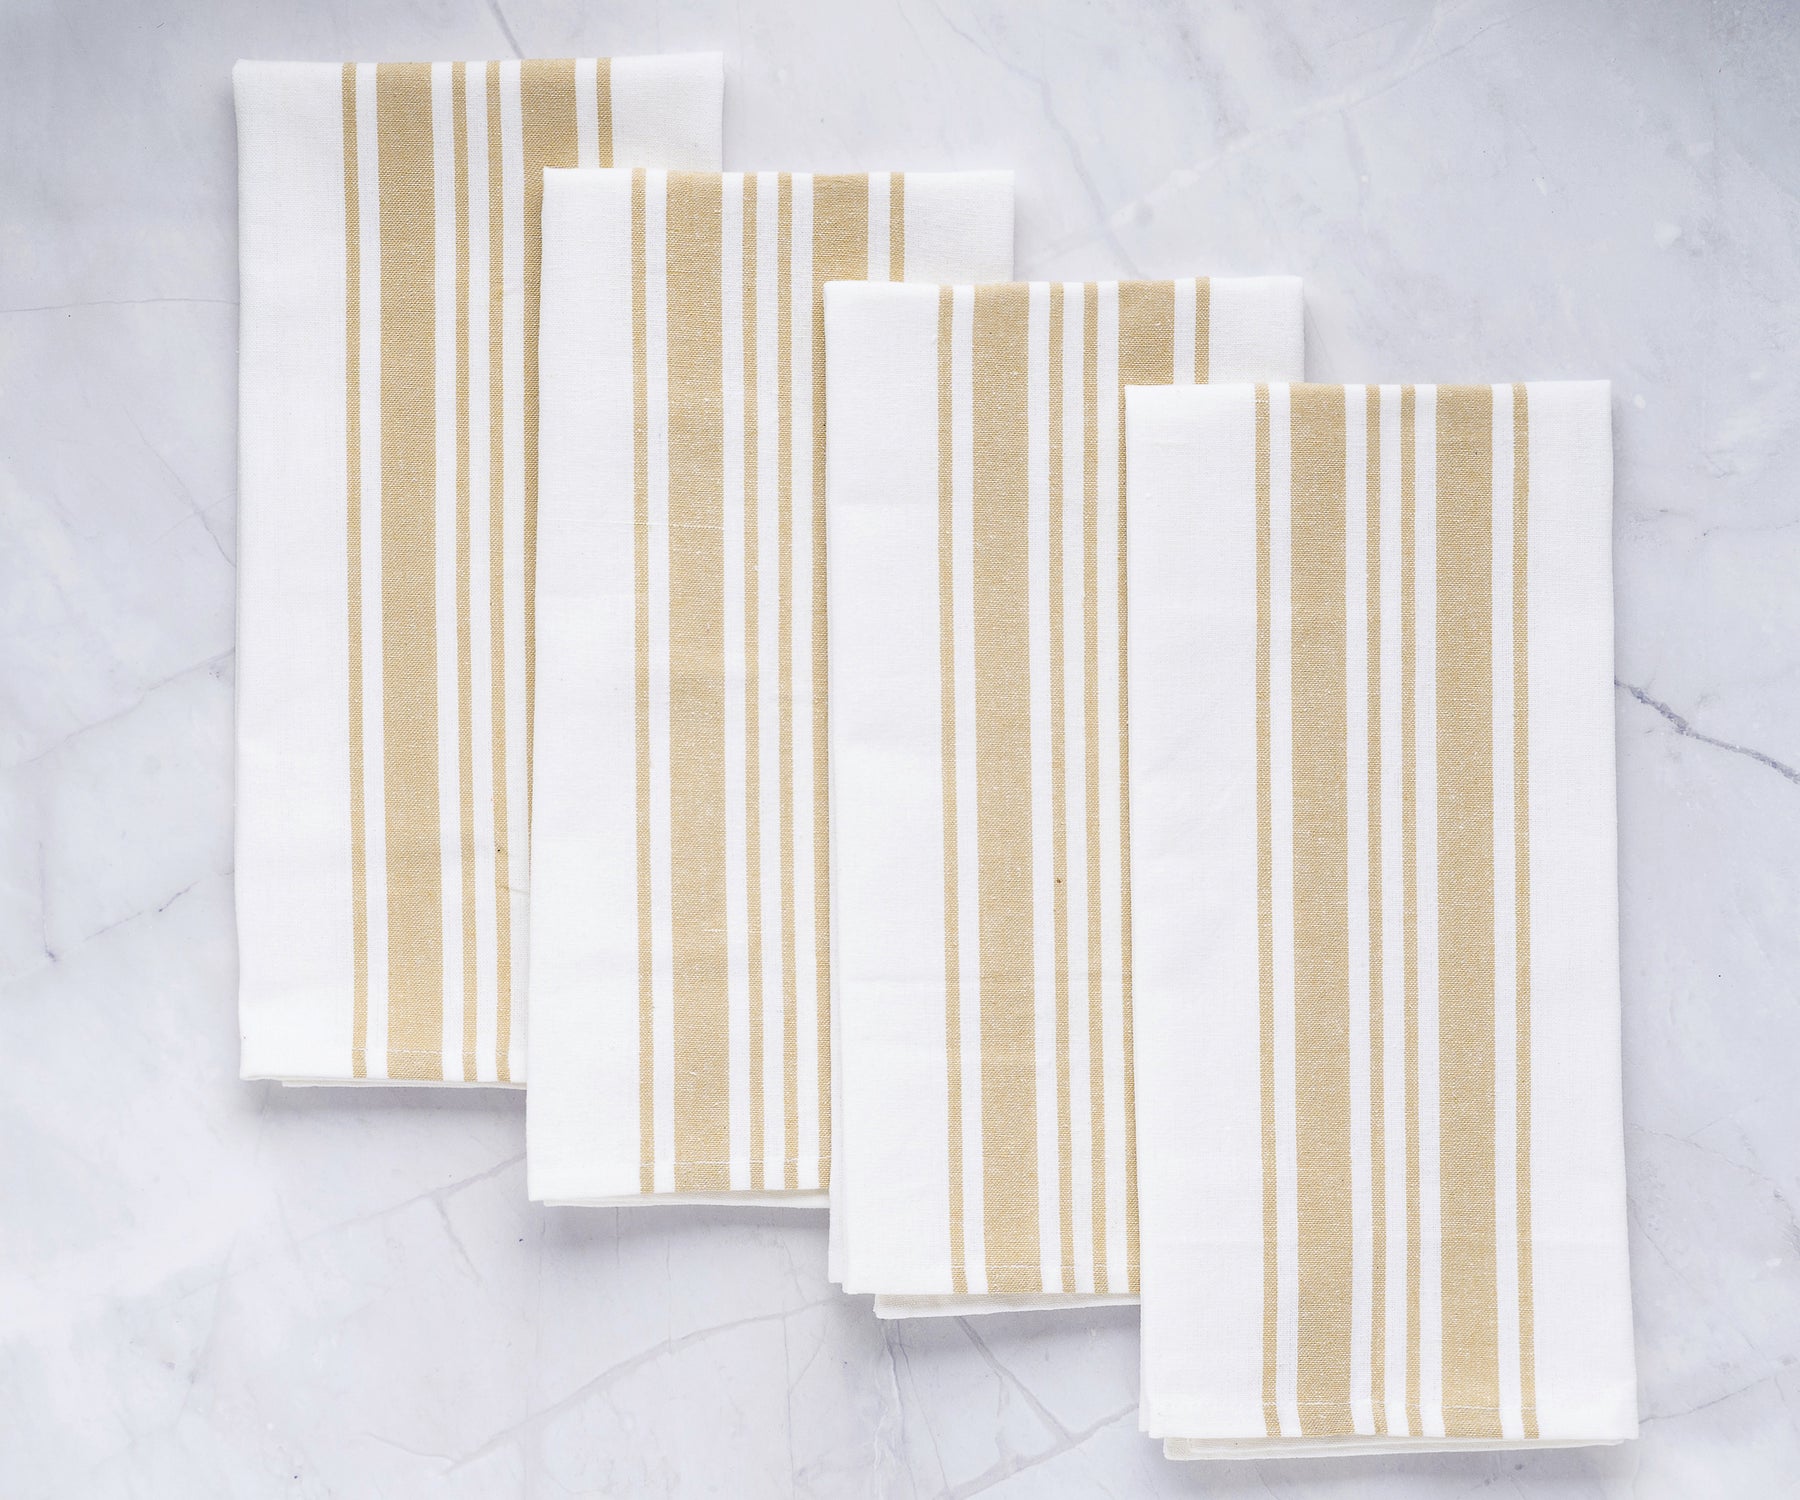 A quartet of white kitchen towels with gold stripes presented on a marble surface